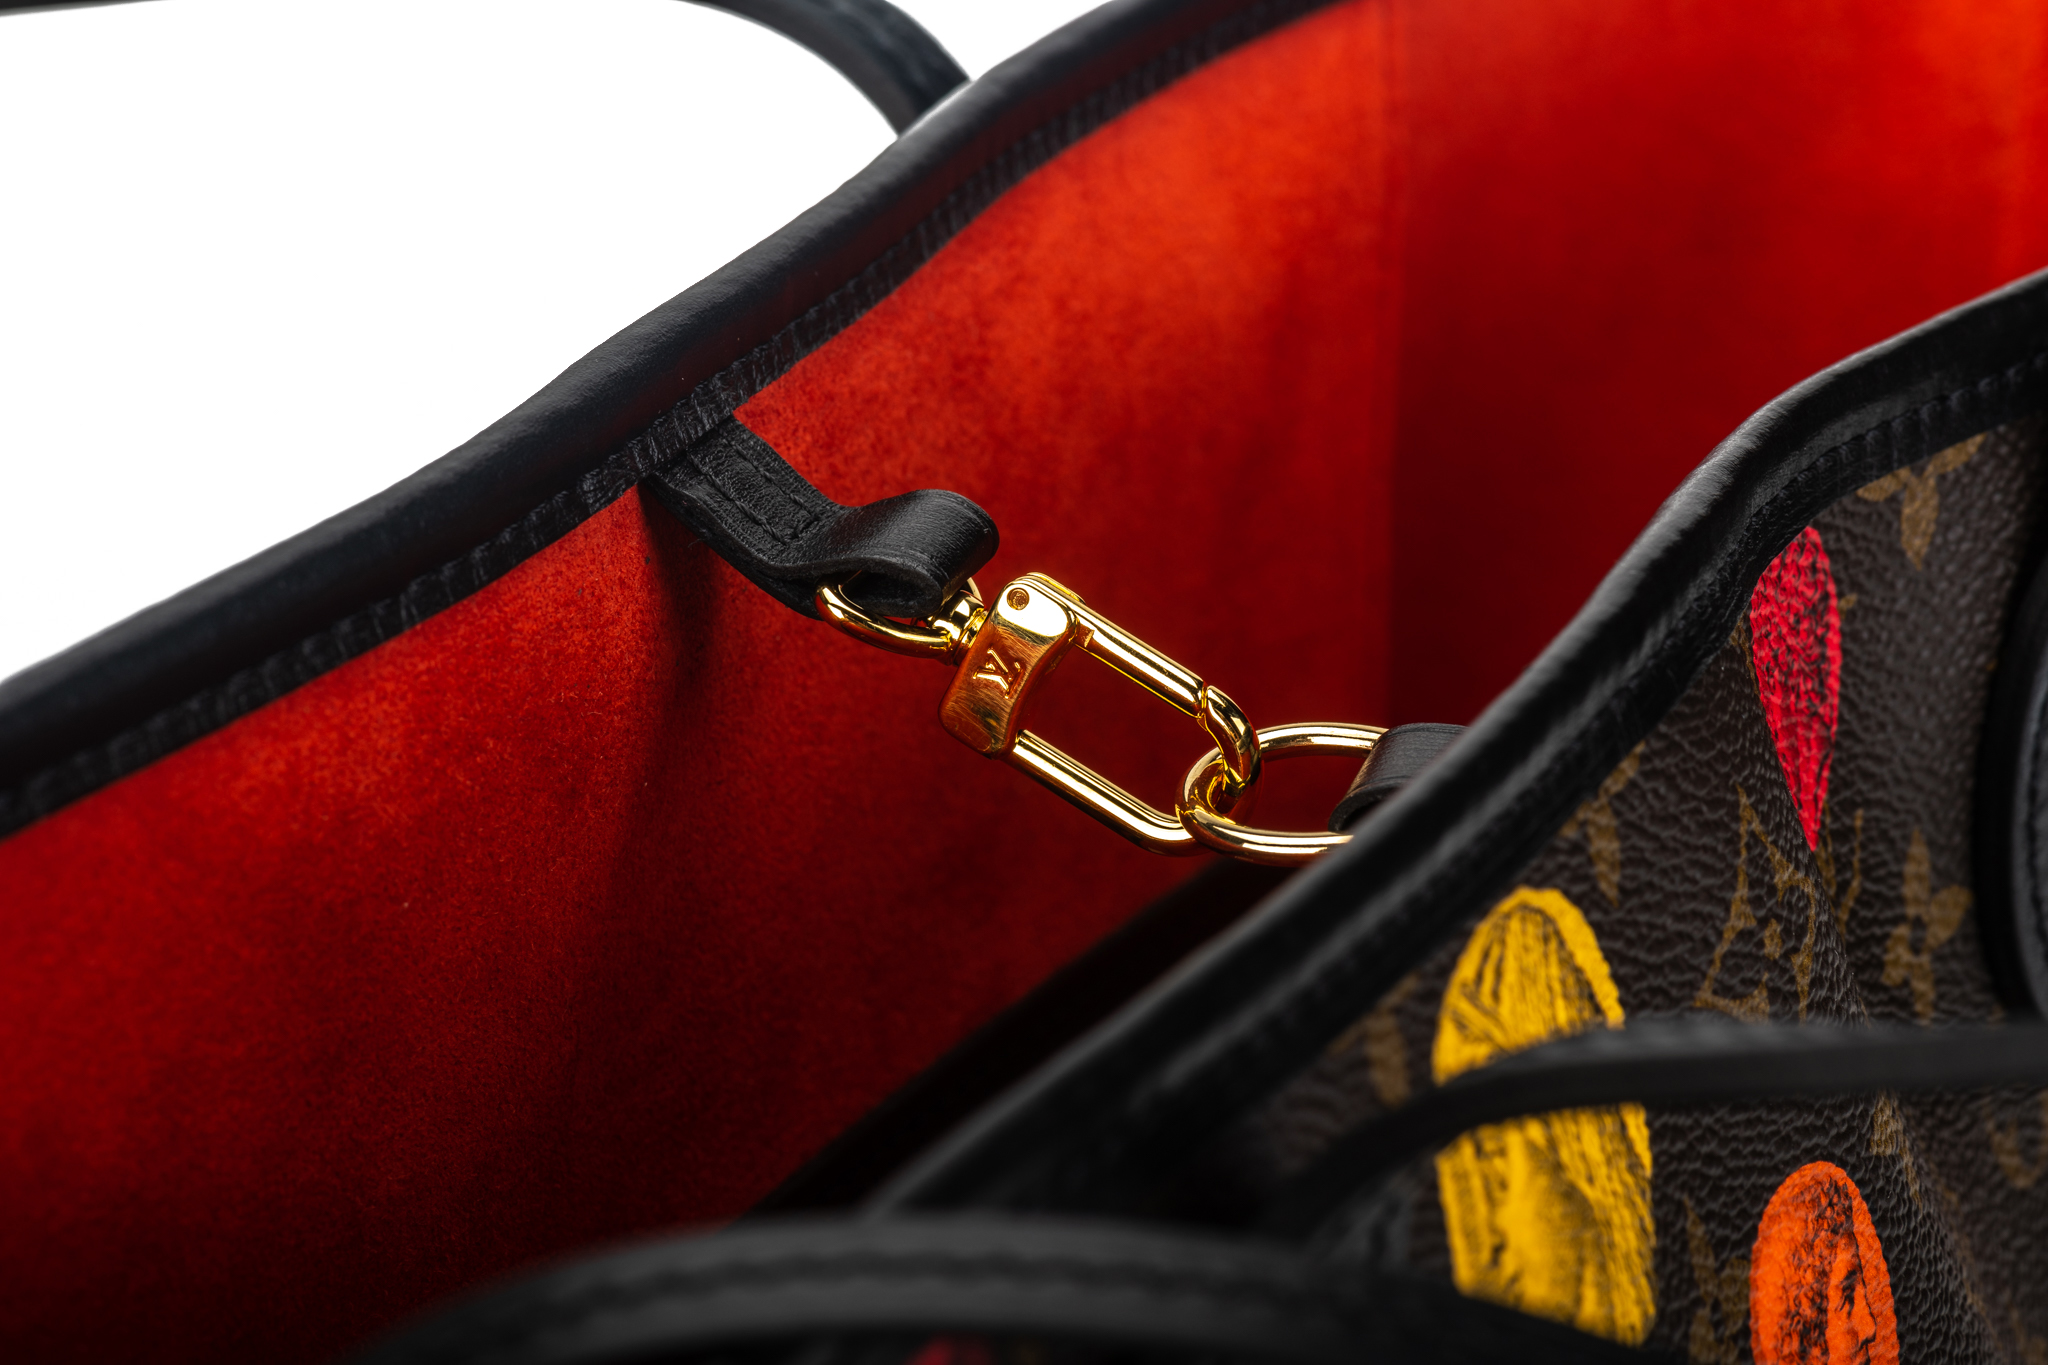 Limited Edition Neverfull MM in Kabuki monogram with Pouch by